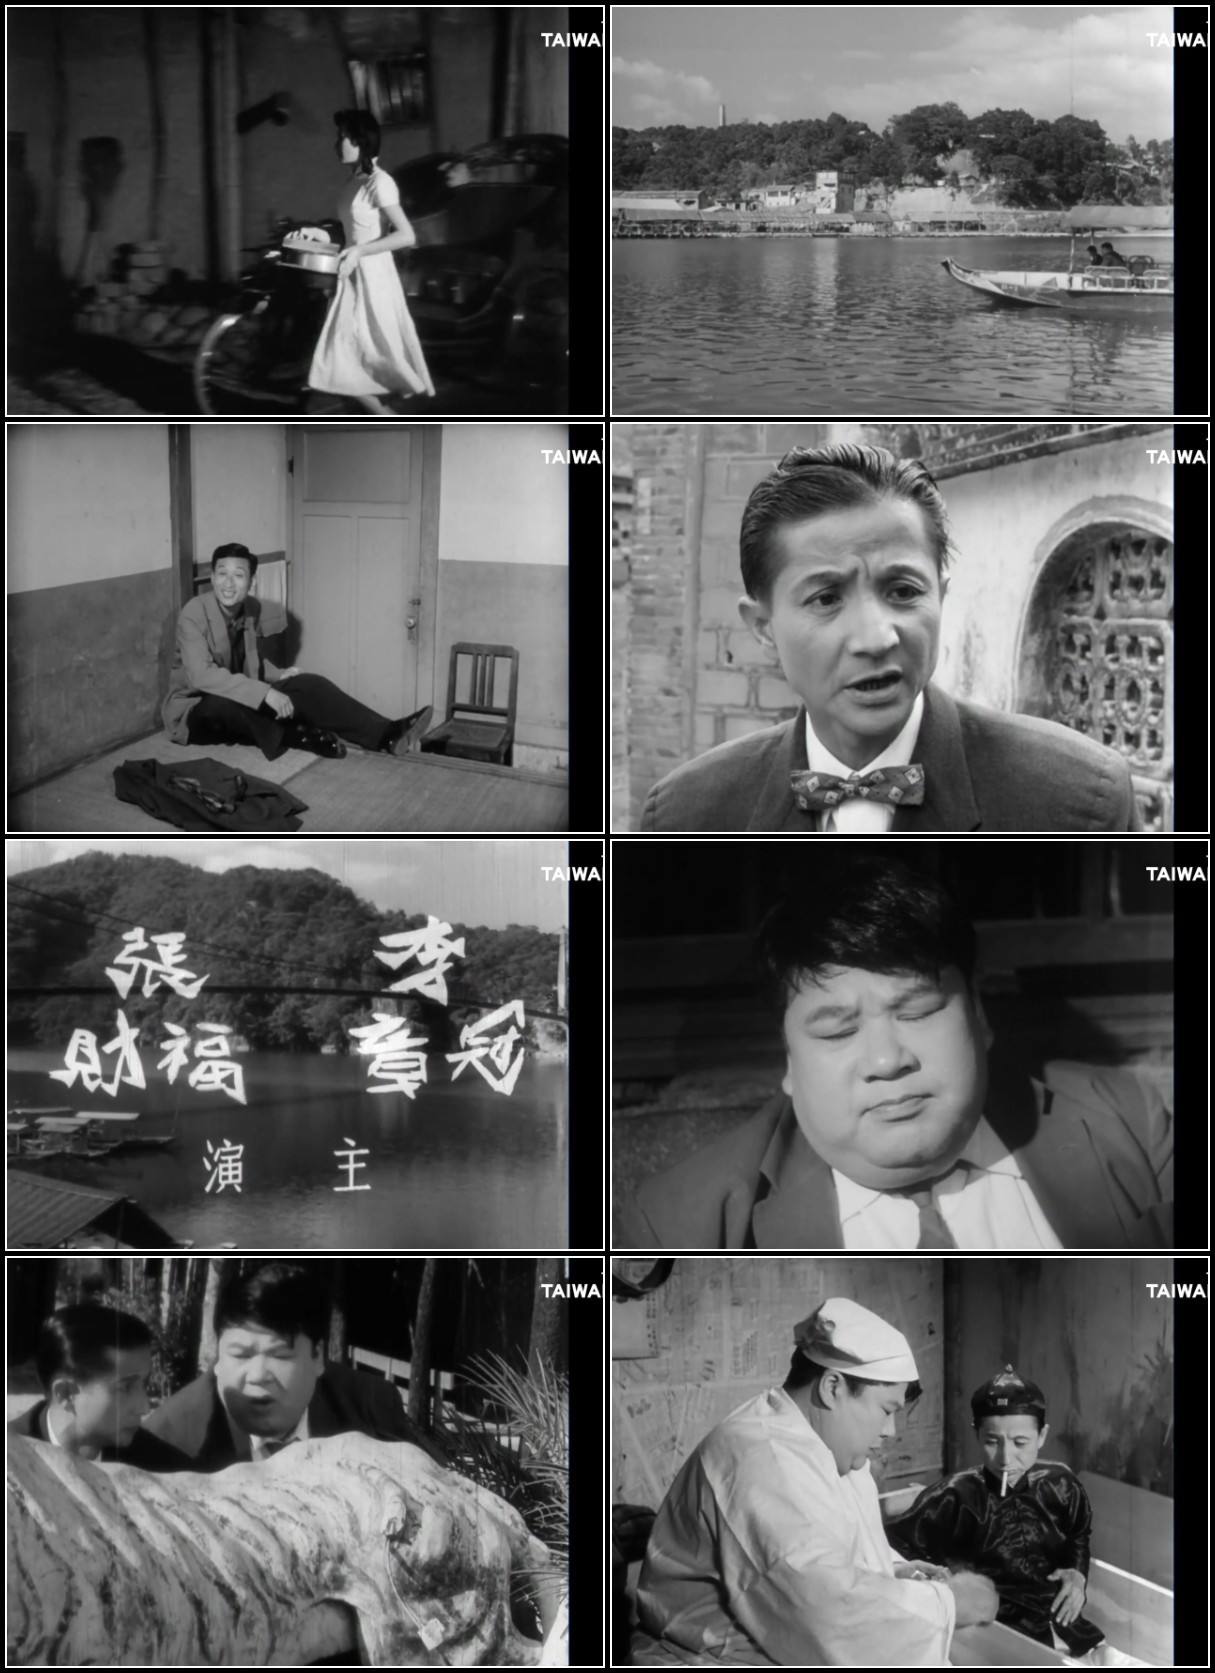 BroTher Liu And BroTher Wang On The Roads In Taiwan Part 1 (1959) 720p WEBRip x264... Joi3ncOn_o